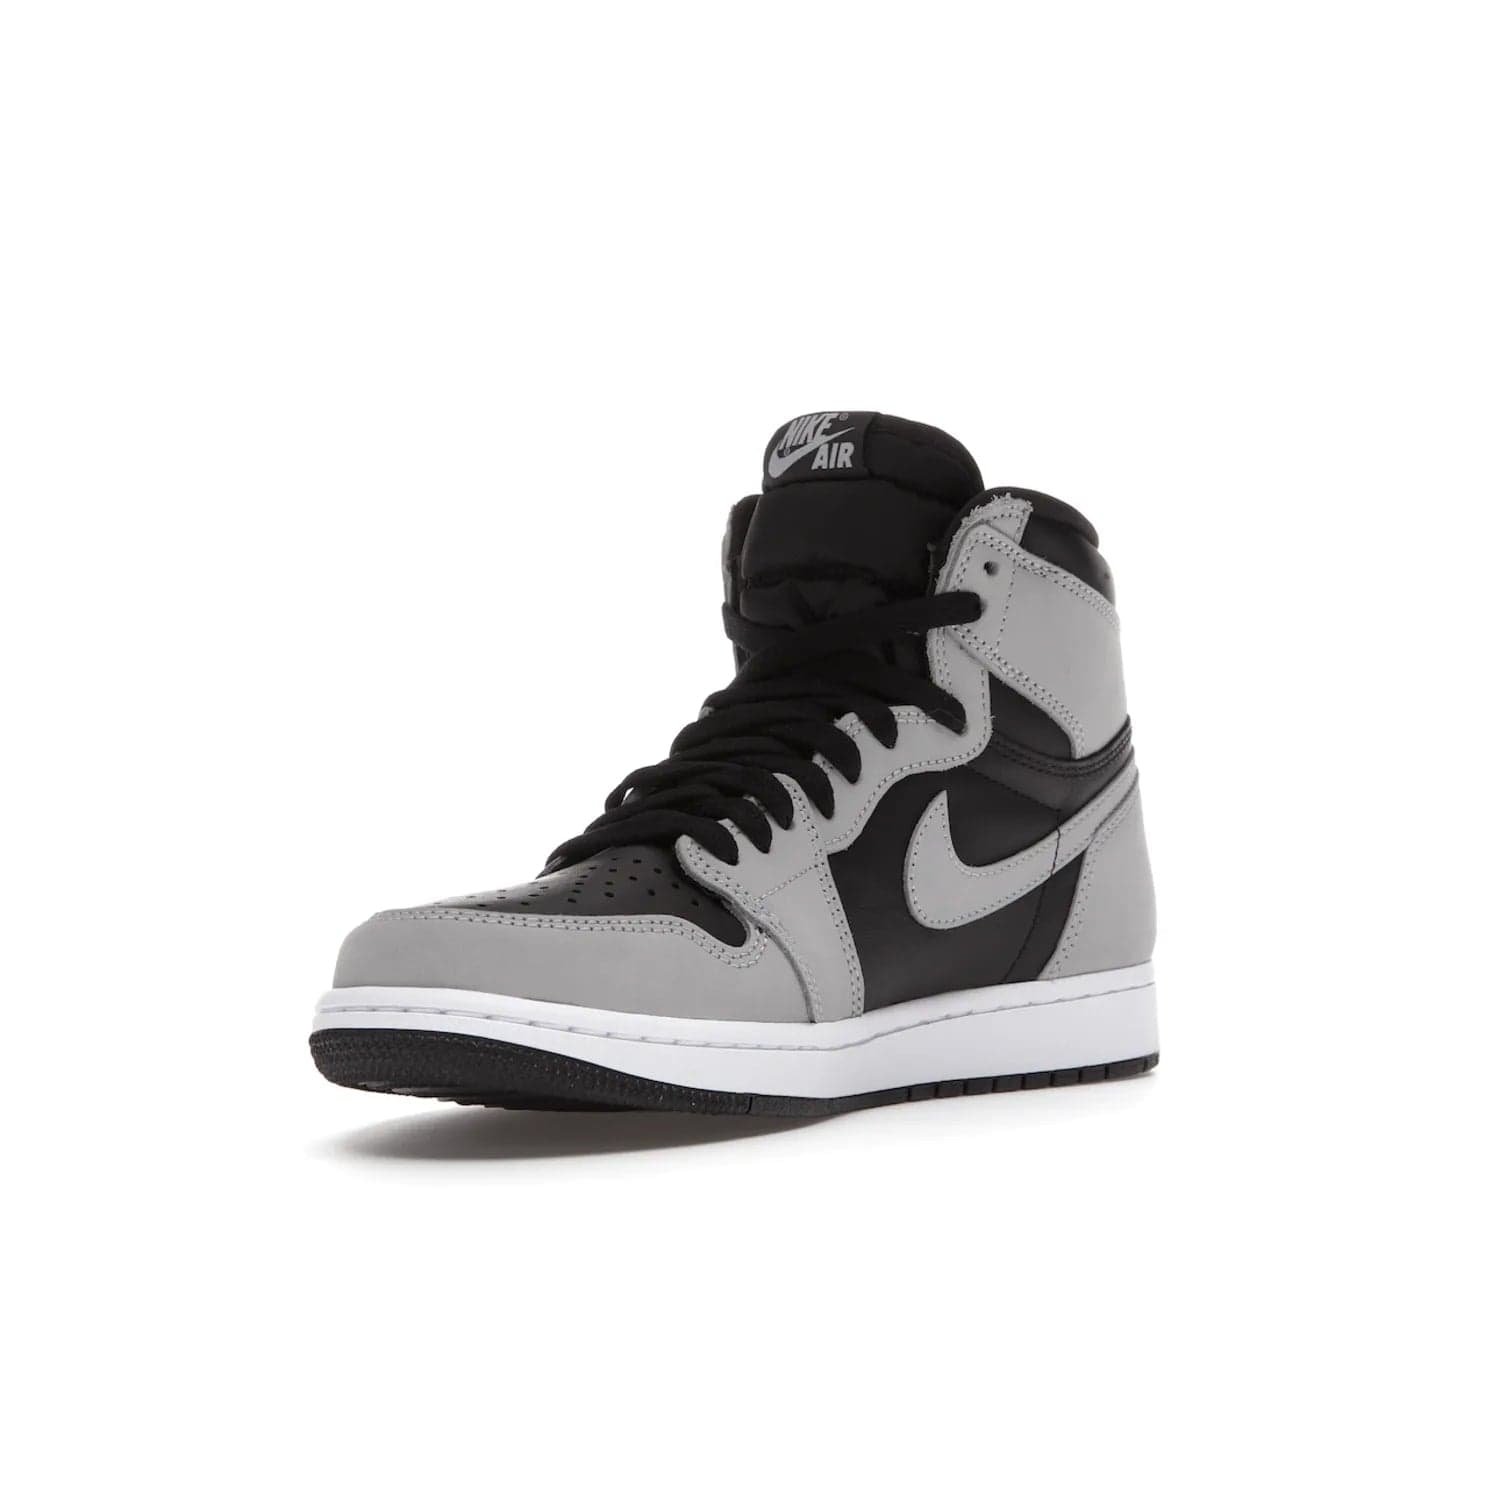 Jordan 1 Retro High Shadow 2.0 - Image 14 - Only at www.BallersClubKickz.com - #
Classic Air Jordan 1 Retro High Shadow 2.0 with black leather base and Light Smoke Grey overlays. Released in May 2021.